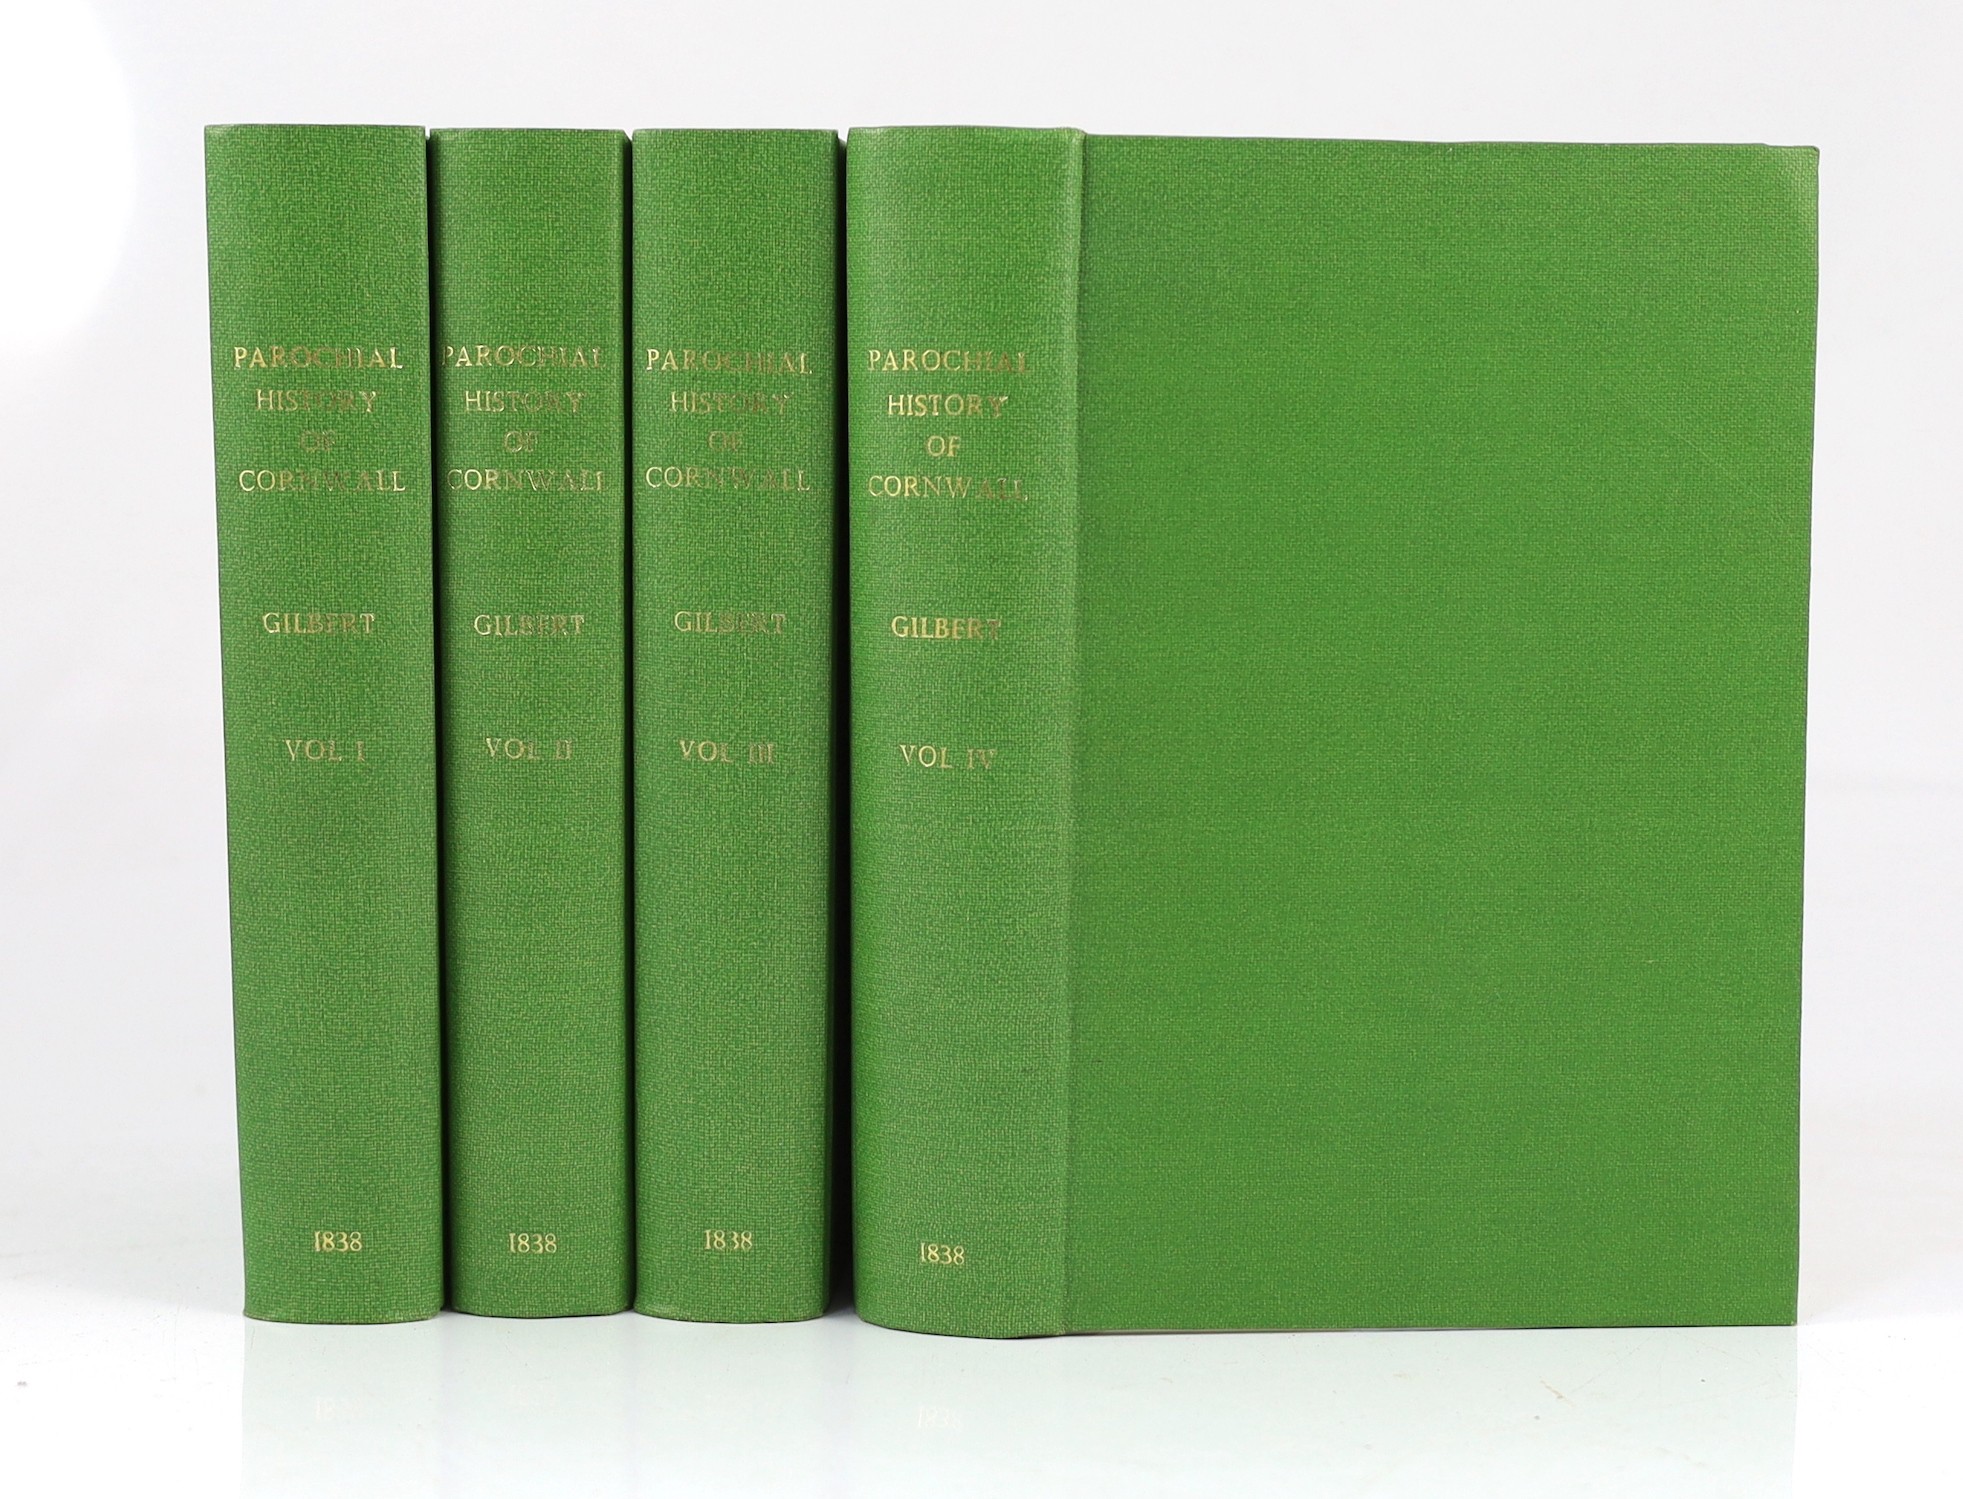 CORNWALL: Gibert, Davies - The Parochial History of Cornwall, founded on the manuscript histories of Mr. Hals and Mr. Tonkin; with additions ... 4 vols. half titles; rebound gilt-lettered cloth, uncut. 1838 (4)